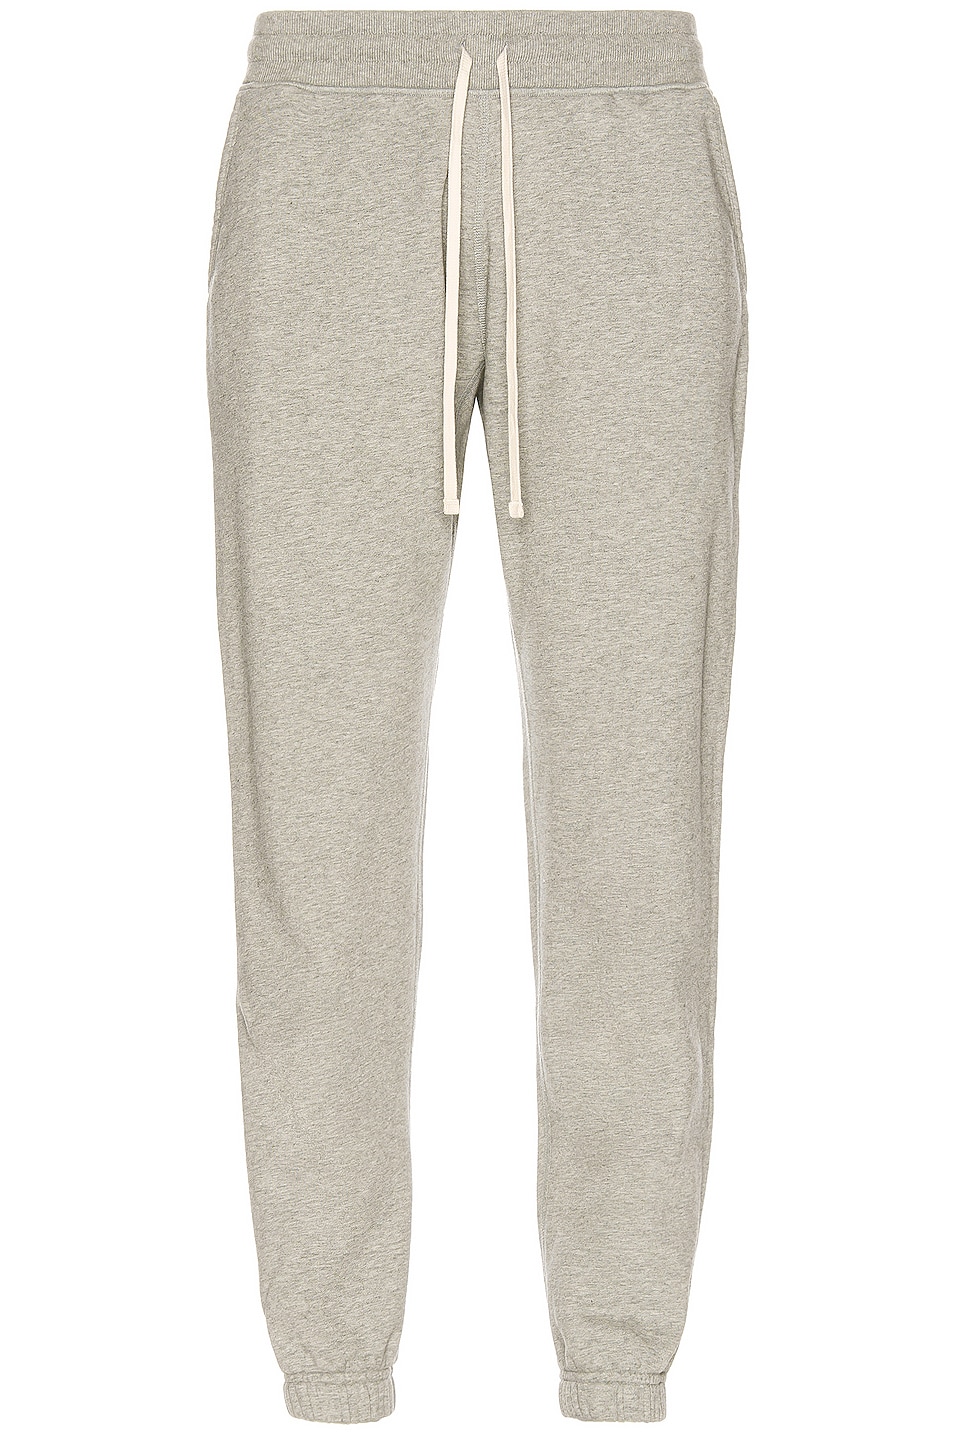 Image 1 of Reigning Champ Cuffed Sweatpant in Heather Grey